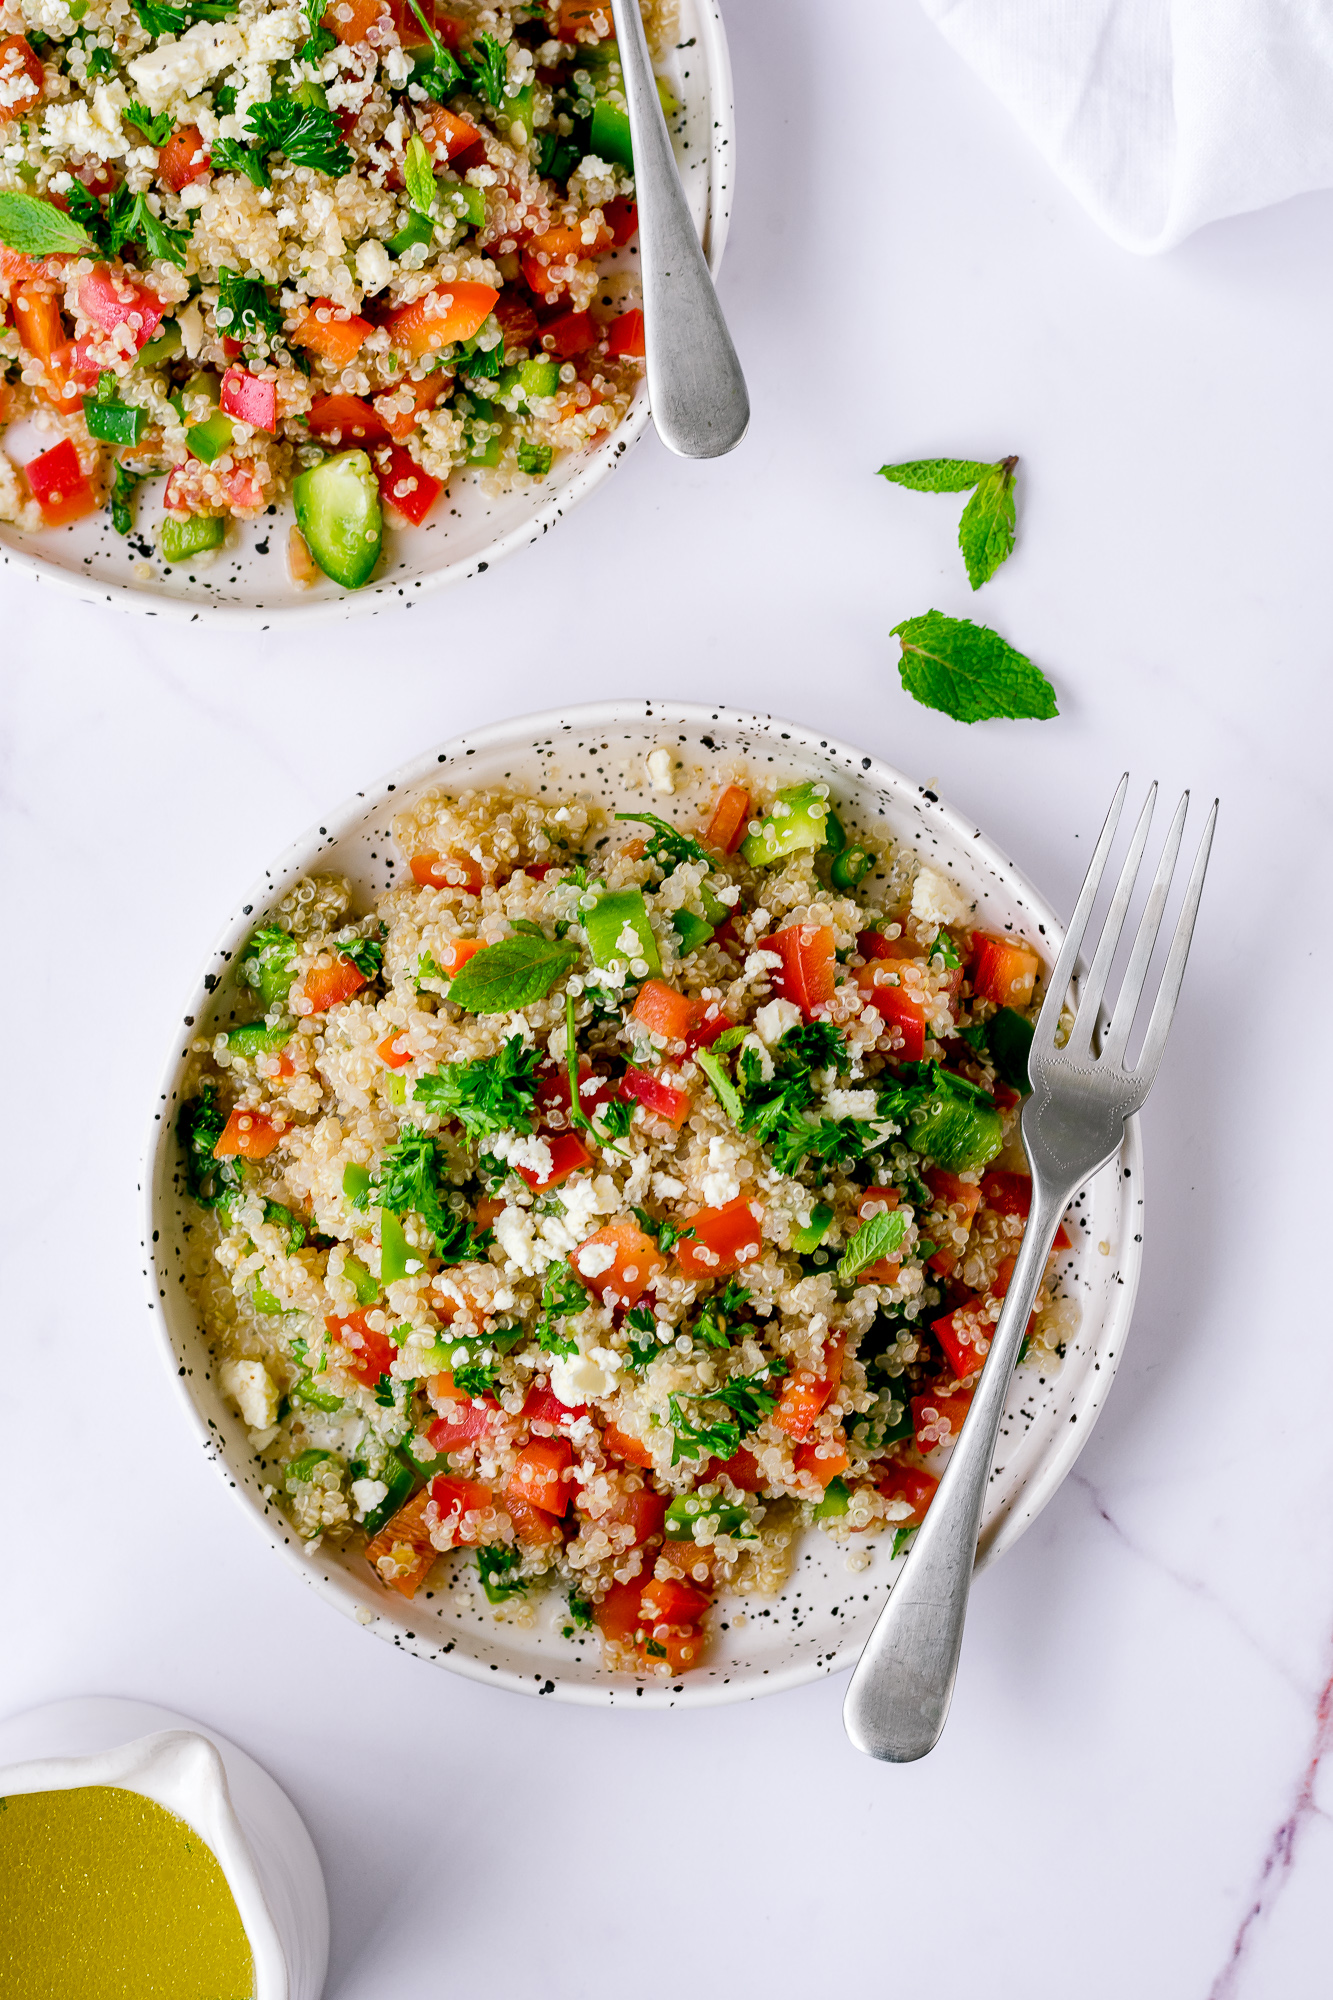 Low FODMAP Tabbouleh with Peppers